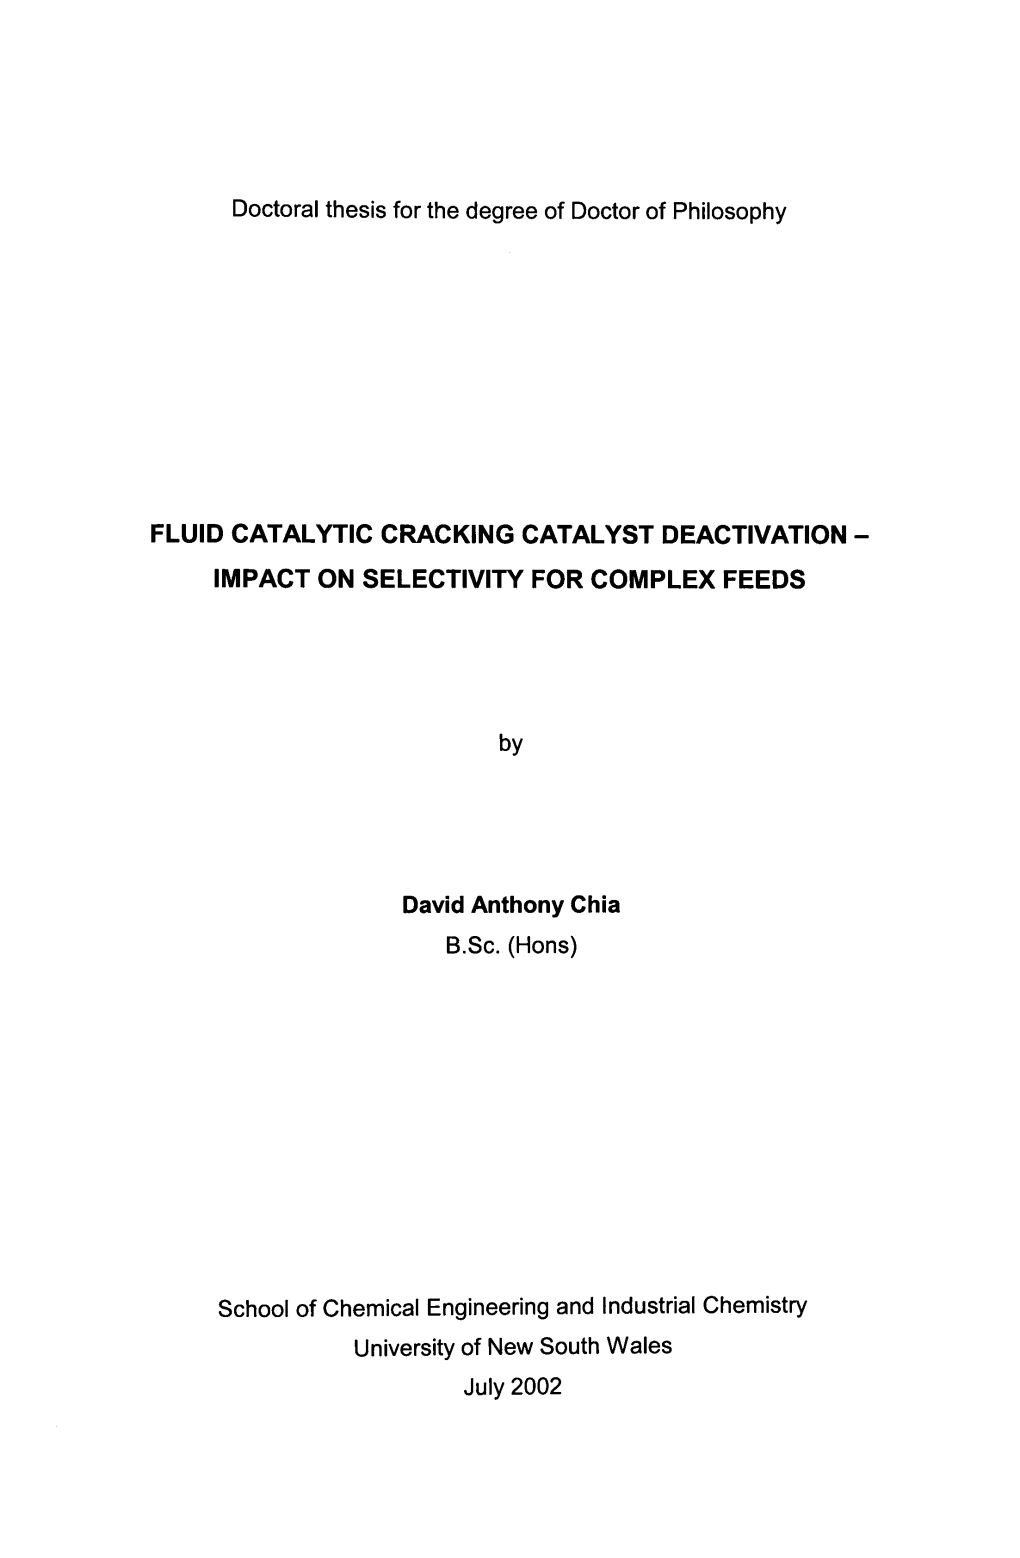 Fluid Catalytic Cracking Catalyst Deactivation - Impact on Selectivity for Complex Feeds